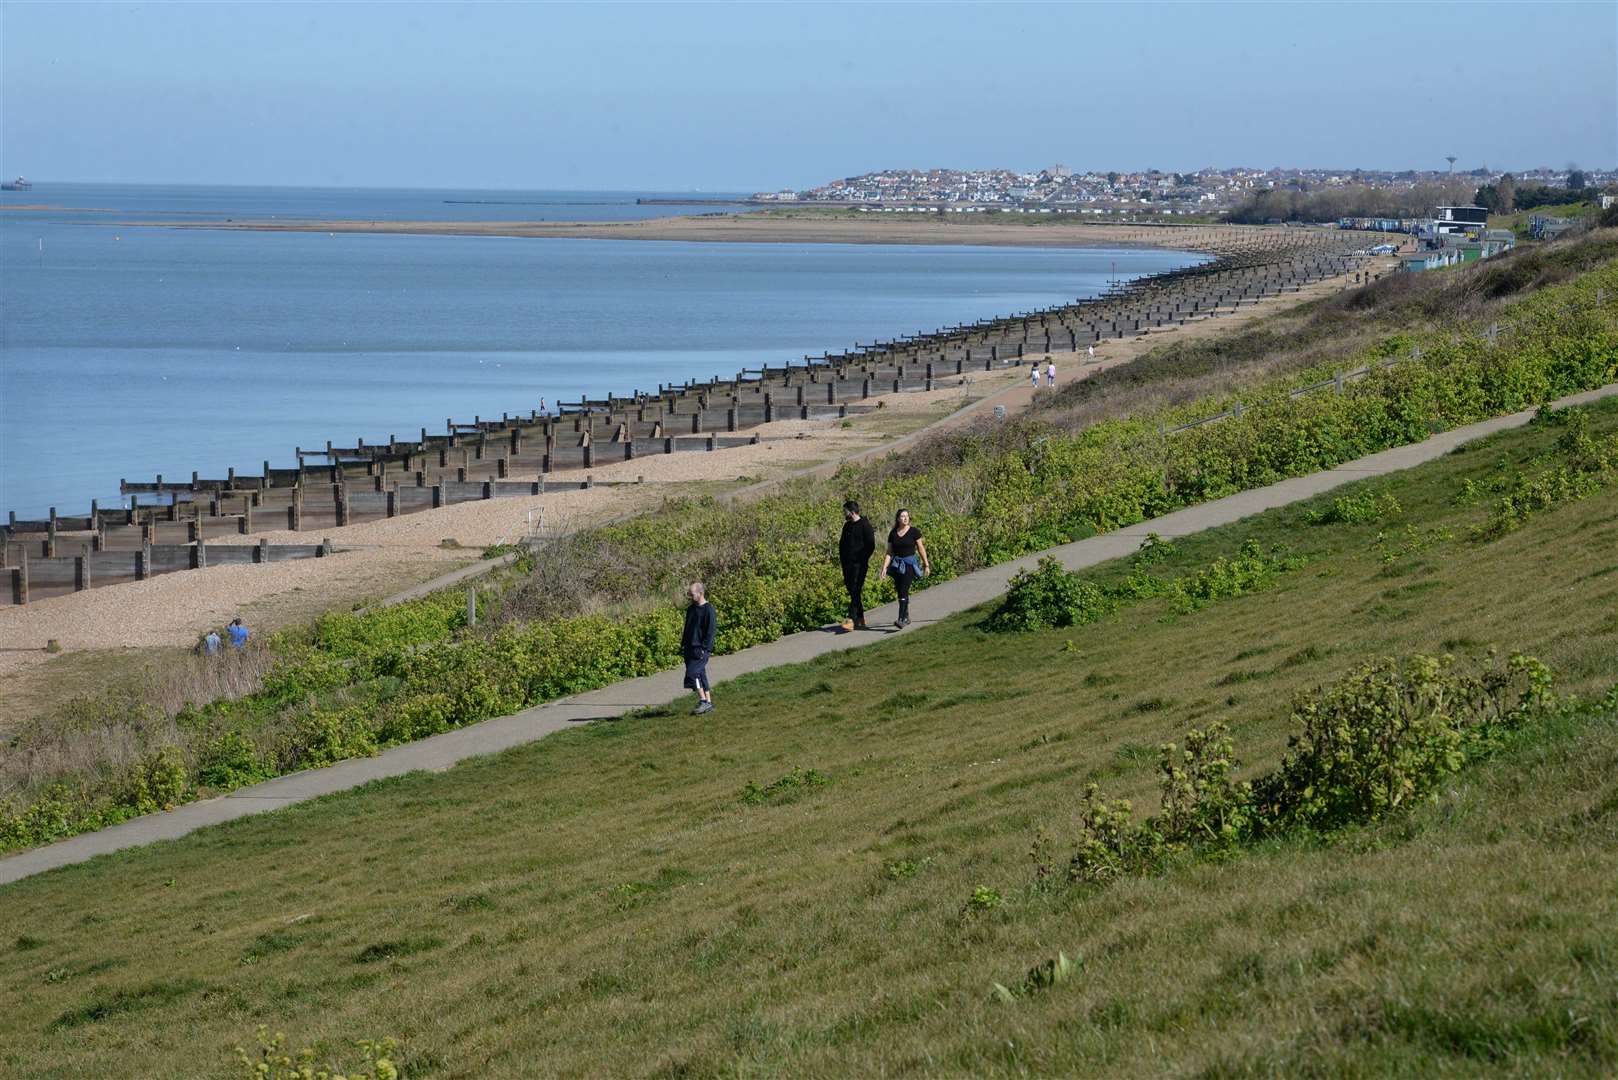 A few people on Tankerton Slopes, Whitstable, on Saturday afternoon, as social distancing allows. Picture: Chris Davey.